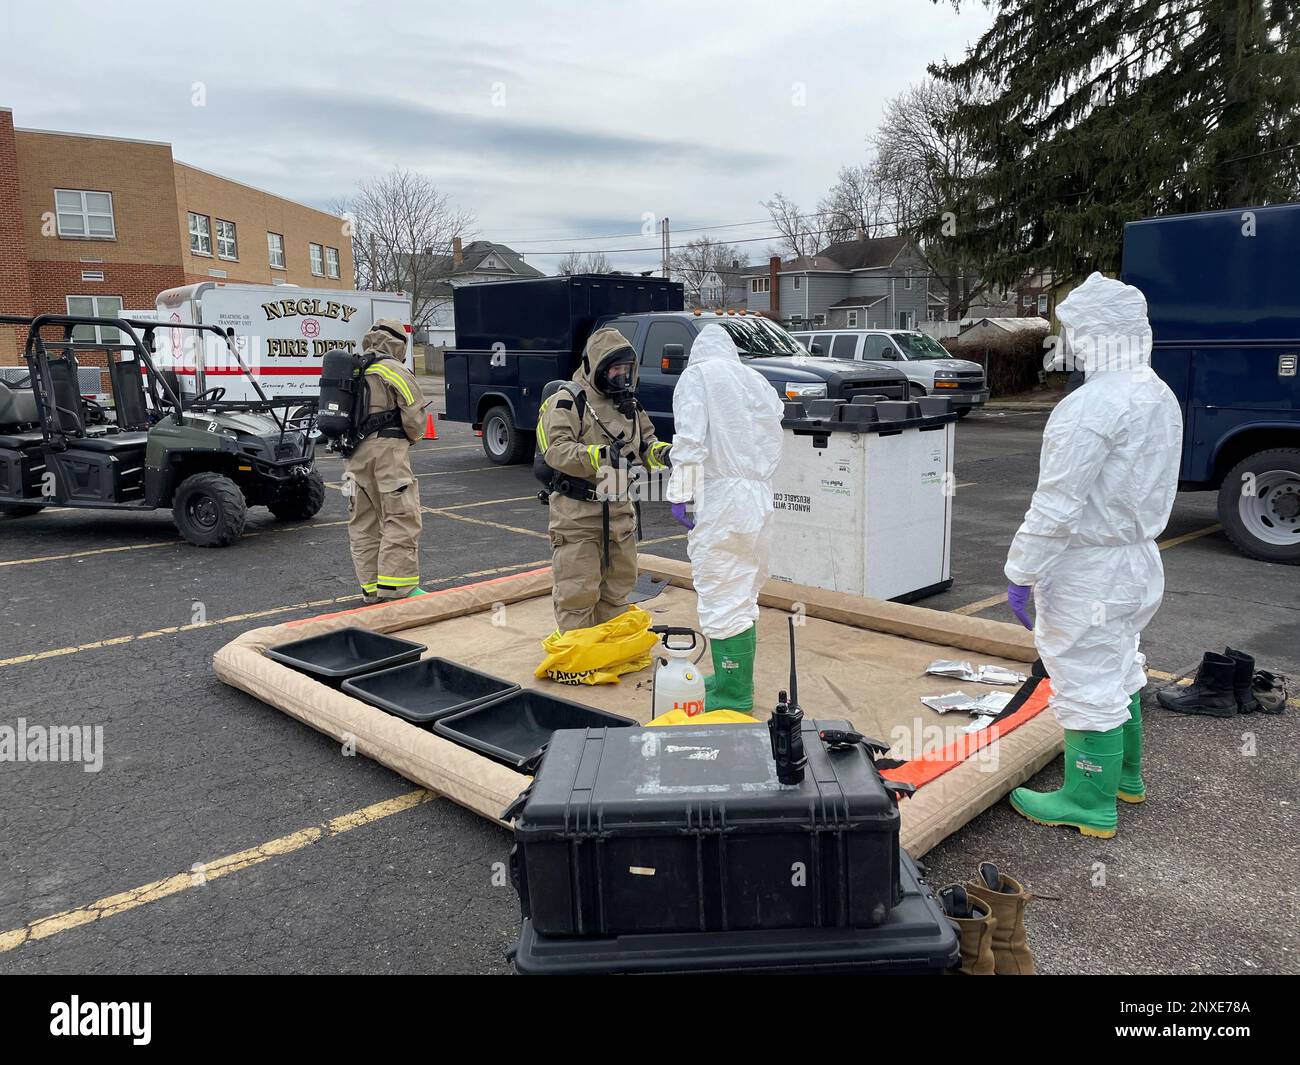 Members of the Ohio National Guard’s 52nd Civil Support Team prepare to enter an incident area to assess and monitor public facilities for any potential remaining hazards with a lightweight inflatable decontamination system (LIDS) in East Palestine, Ohio, Feb. 7, 2023. The LIDS is used to contain any potential contamination that might occur within an incident area following a site assessment. The 52nd CST is supporting local and state authorities with incident assessments and monitoring of hazardous material following a Feb. 3 train derailment in East Palestine. Stock Photo